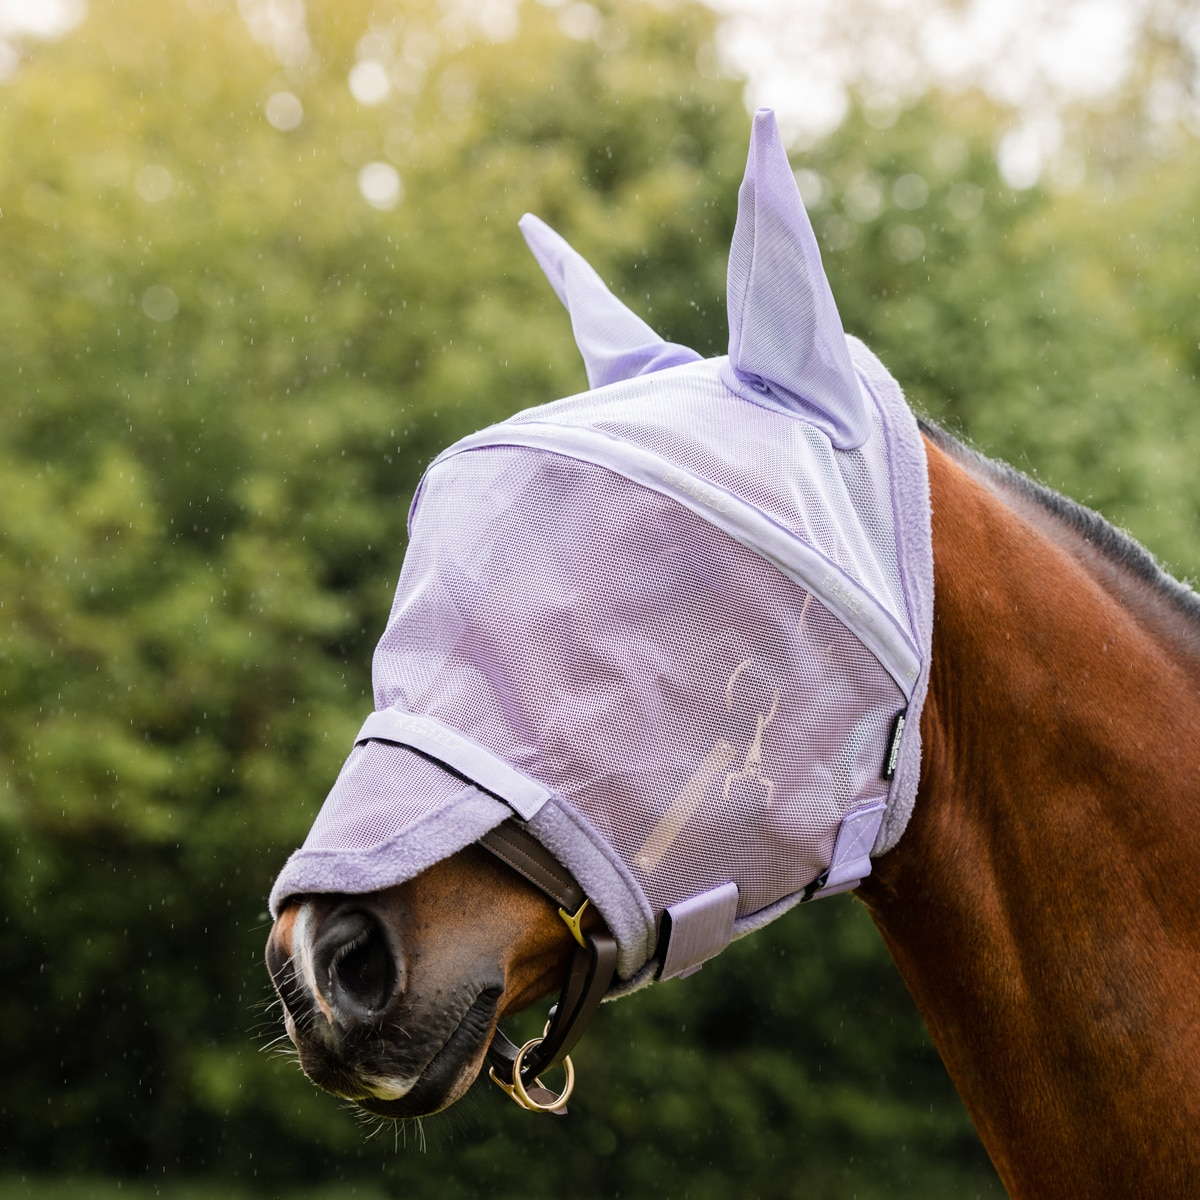 Elastic Horse Fly Mesh Cover UV Headgear with Ears Protection for Protecting Arab Horses Ears and Eyes high Grade Favorable Blocker Horse Fly Mask 